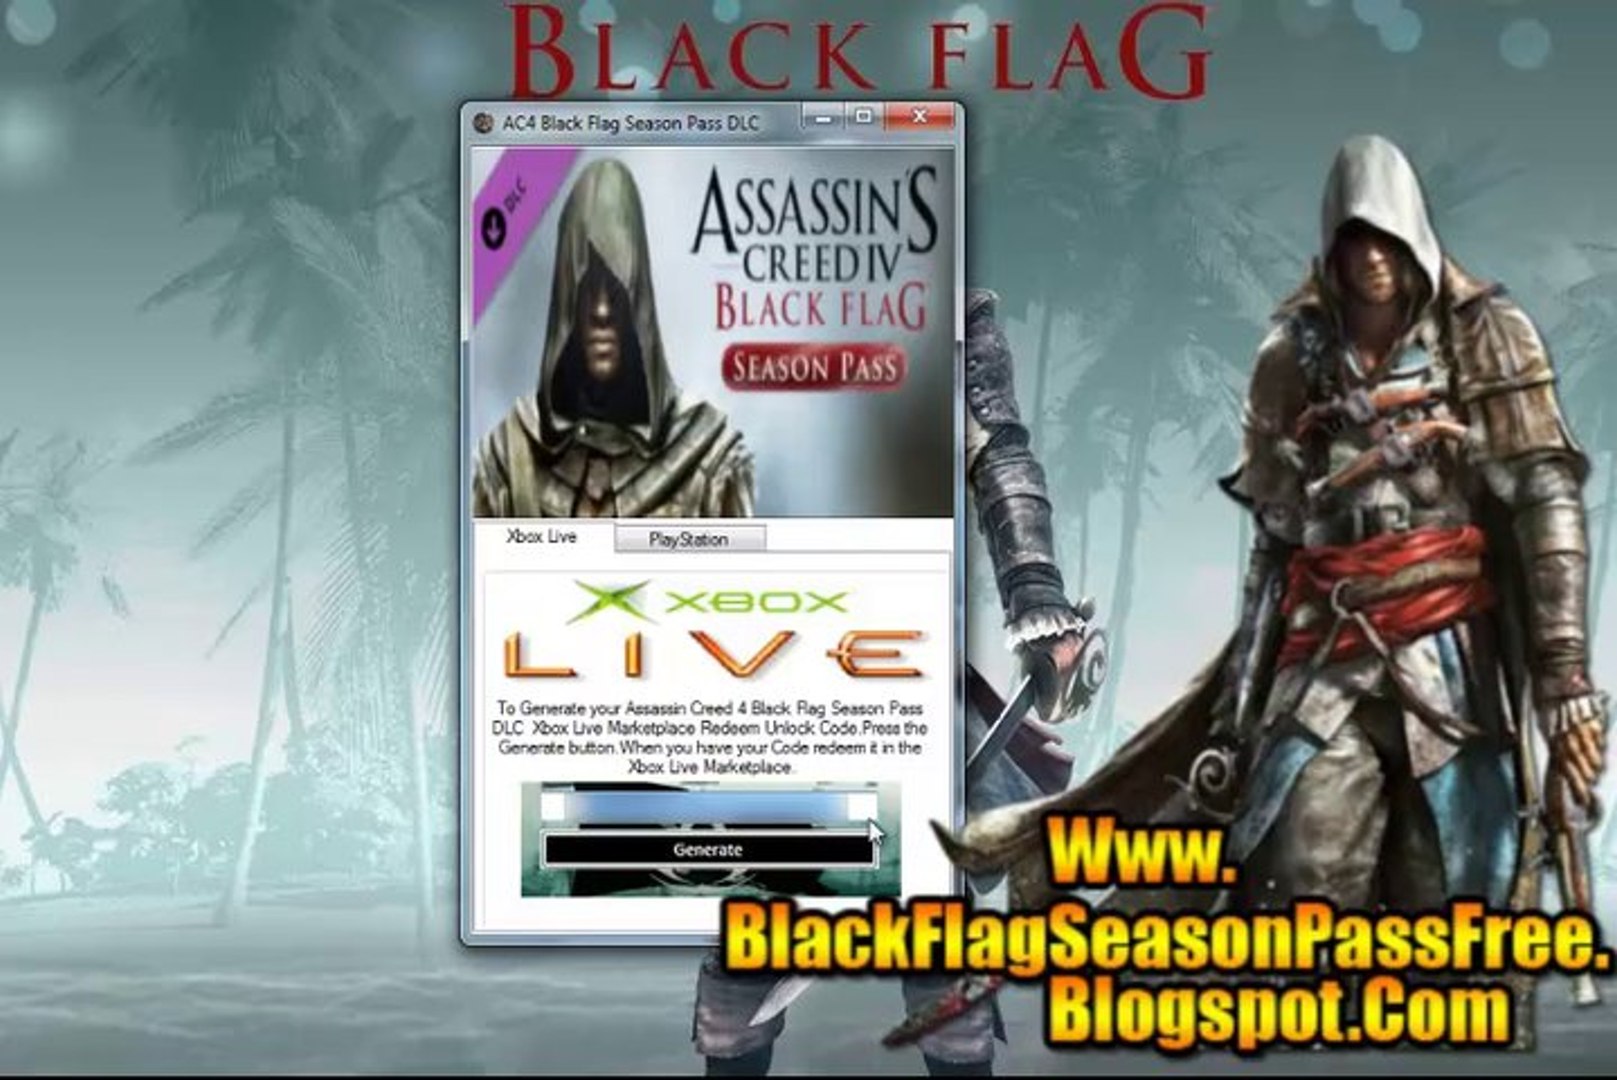 Assassins Creed Iv Black Flag Season Pass Free On Xbox 360 And Ps3 Video Dailymotion